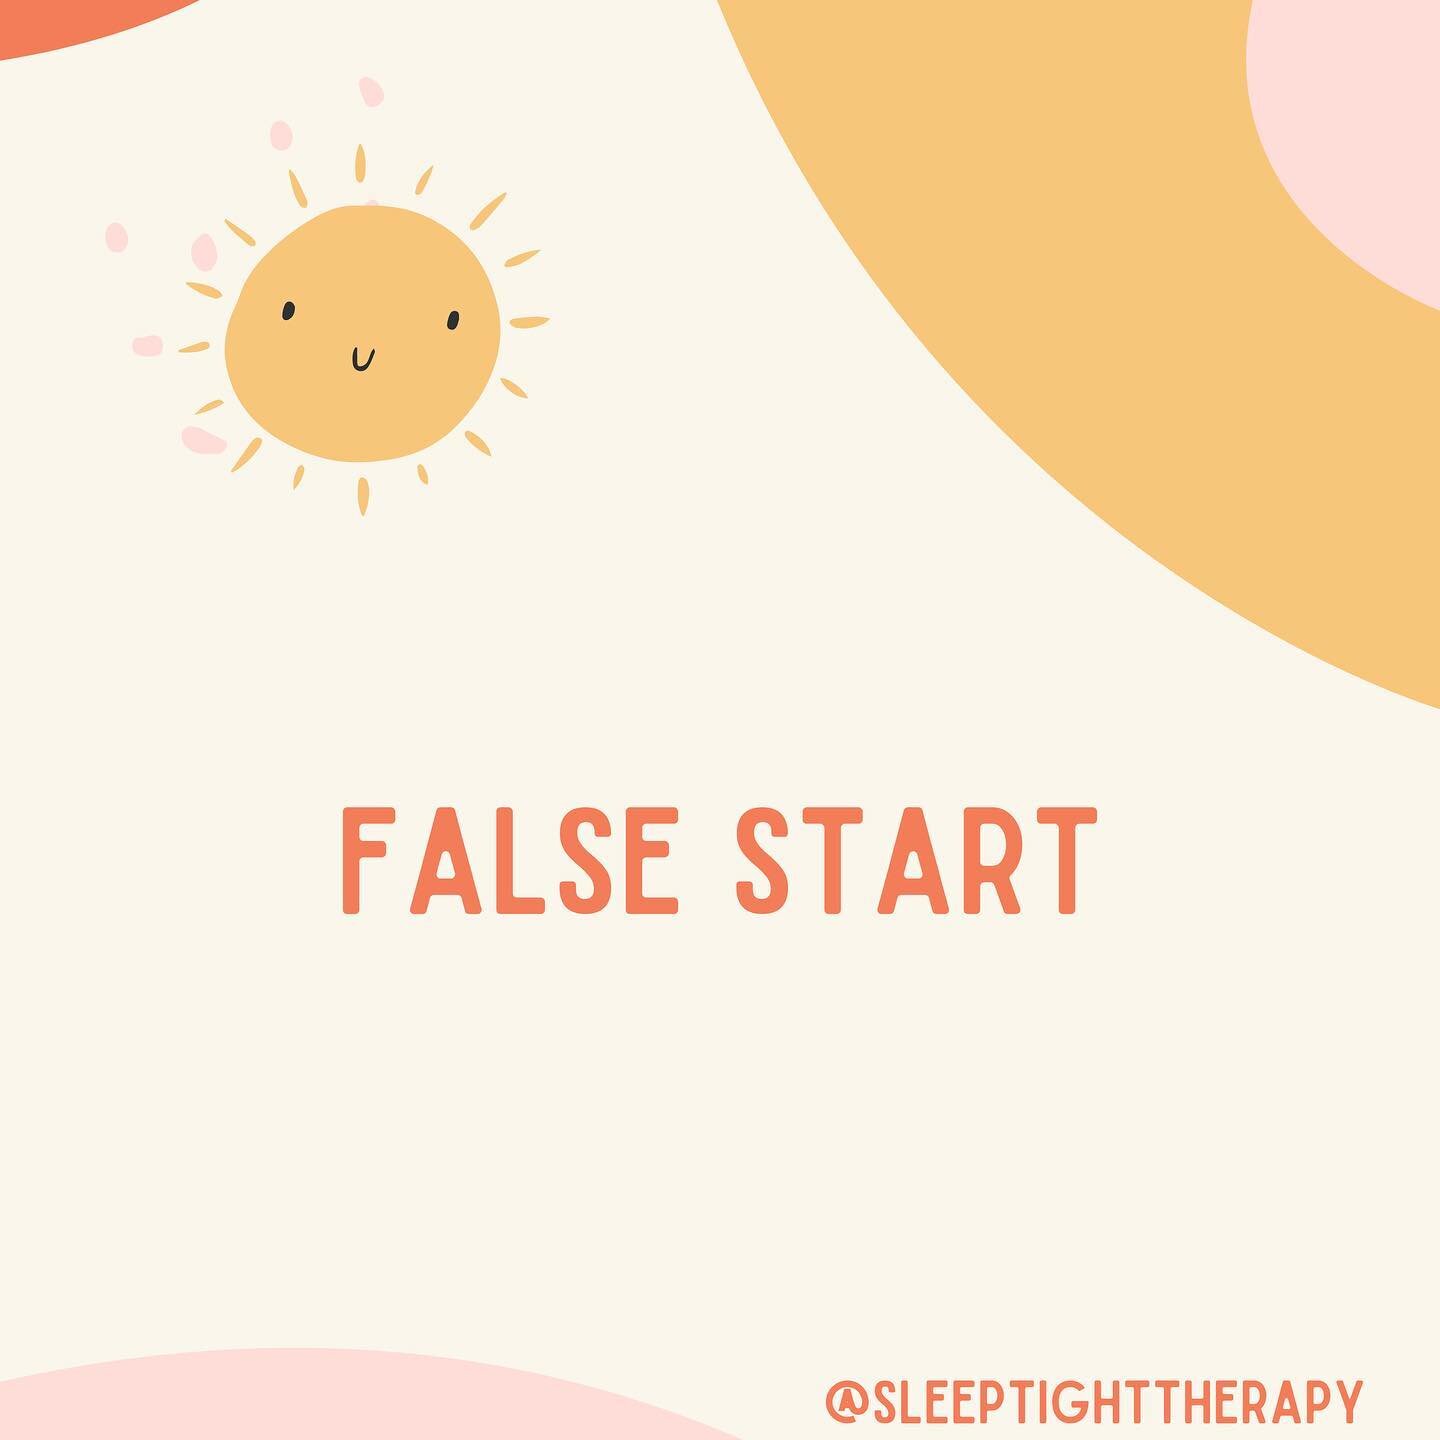 Allllll about false starts 😩⤵️⠀
⠀
✨What is a false start? A false start is when baby wakes up after 1 sleep cycle. This typically happens 30-45 minutes after bedtime. ⠀
⠀
✨Why do false starts happen? The most common cause of a false start is baby be